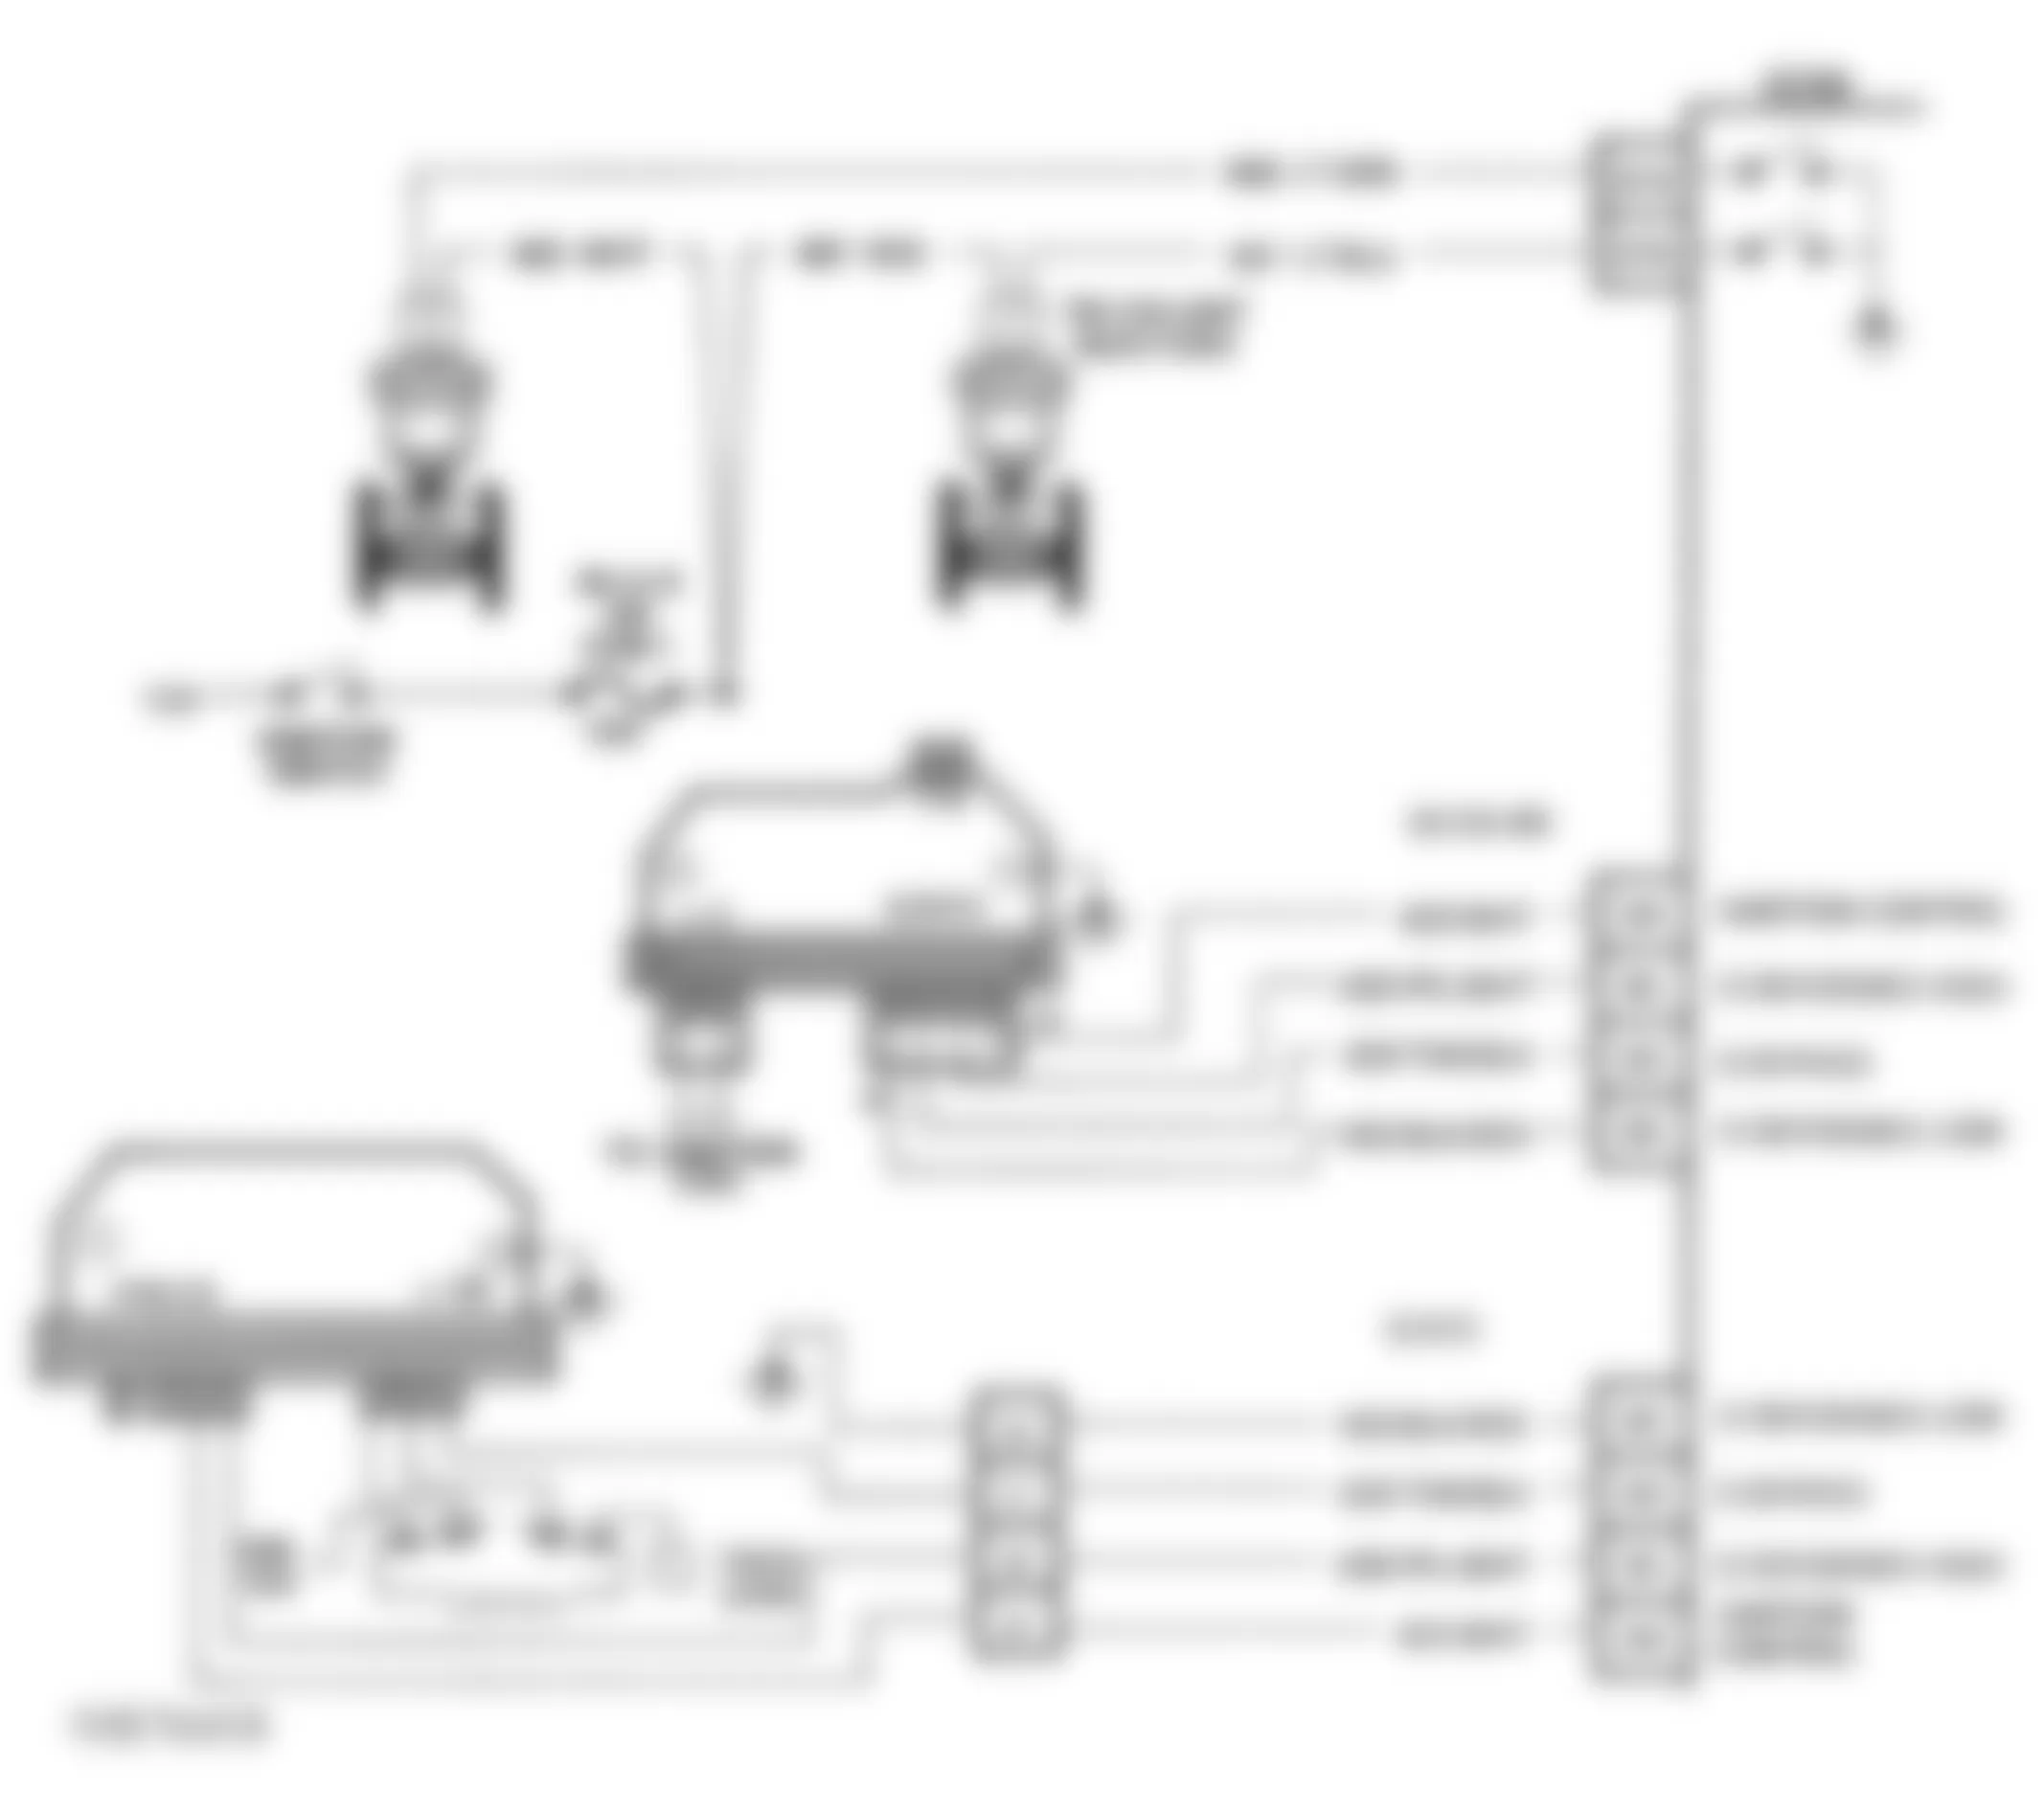 GMC Sonoma 1993 - Component Locations -  CODE 42, Schematic, Electronic Spark Timing (2.8L)